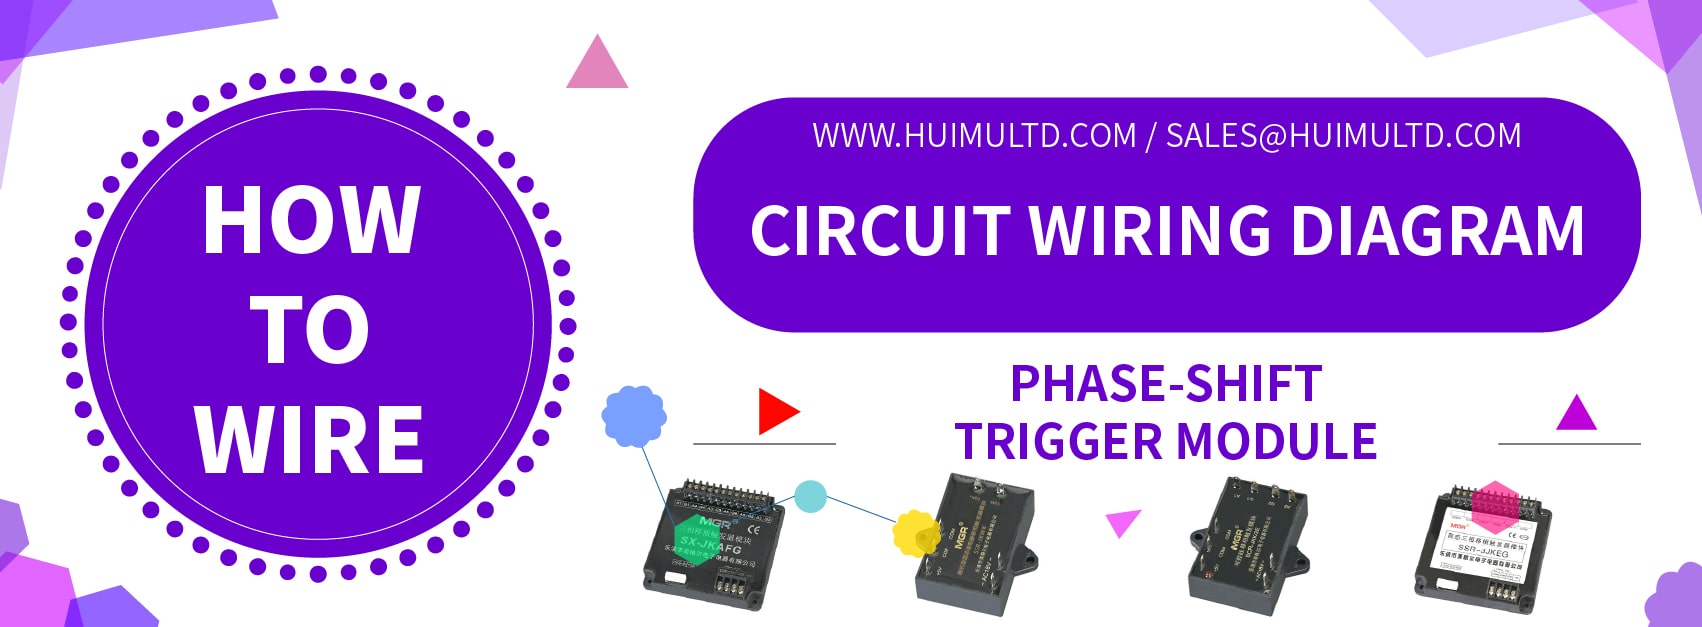 How to wire phase-shift trigger module? banner